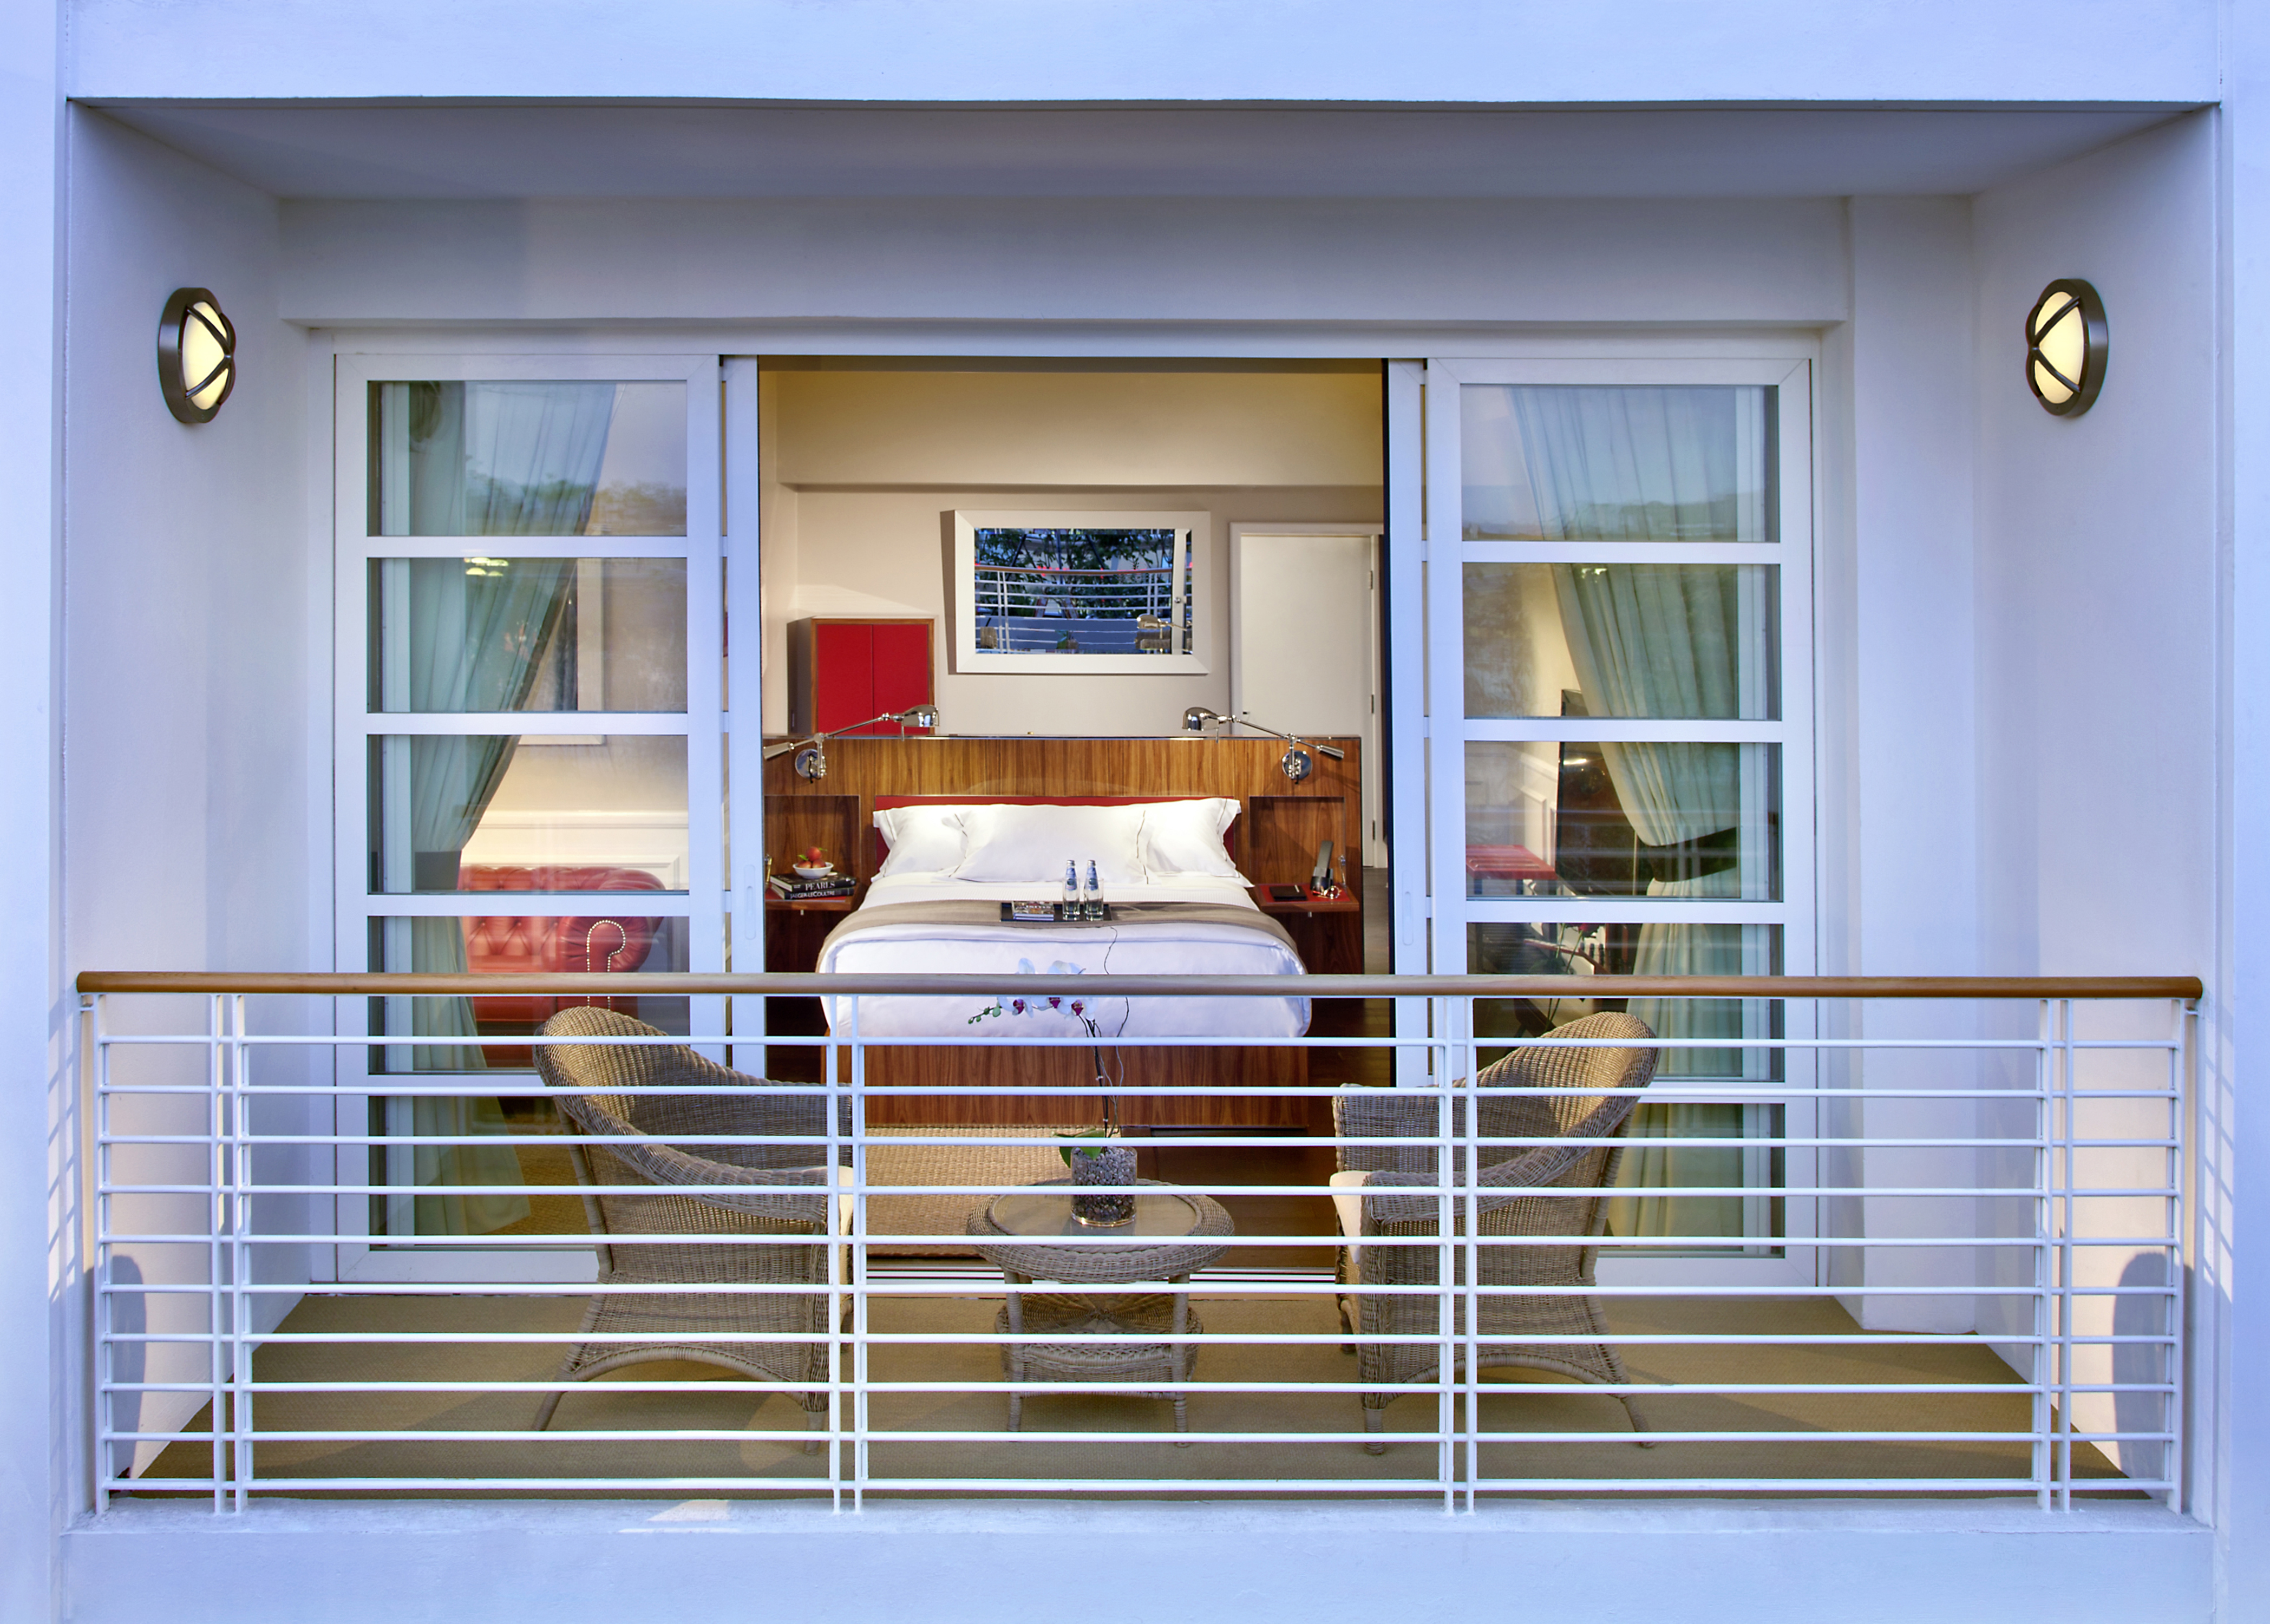 Balcony view with bed and chairs